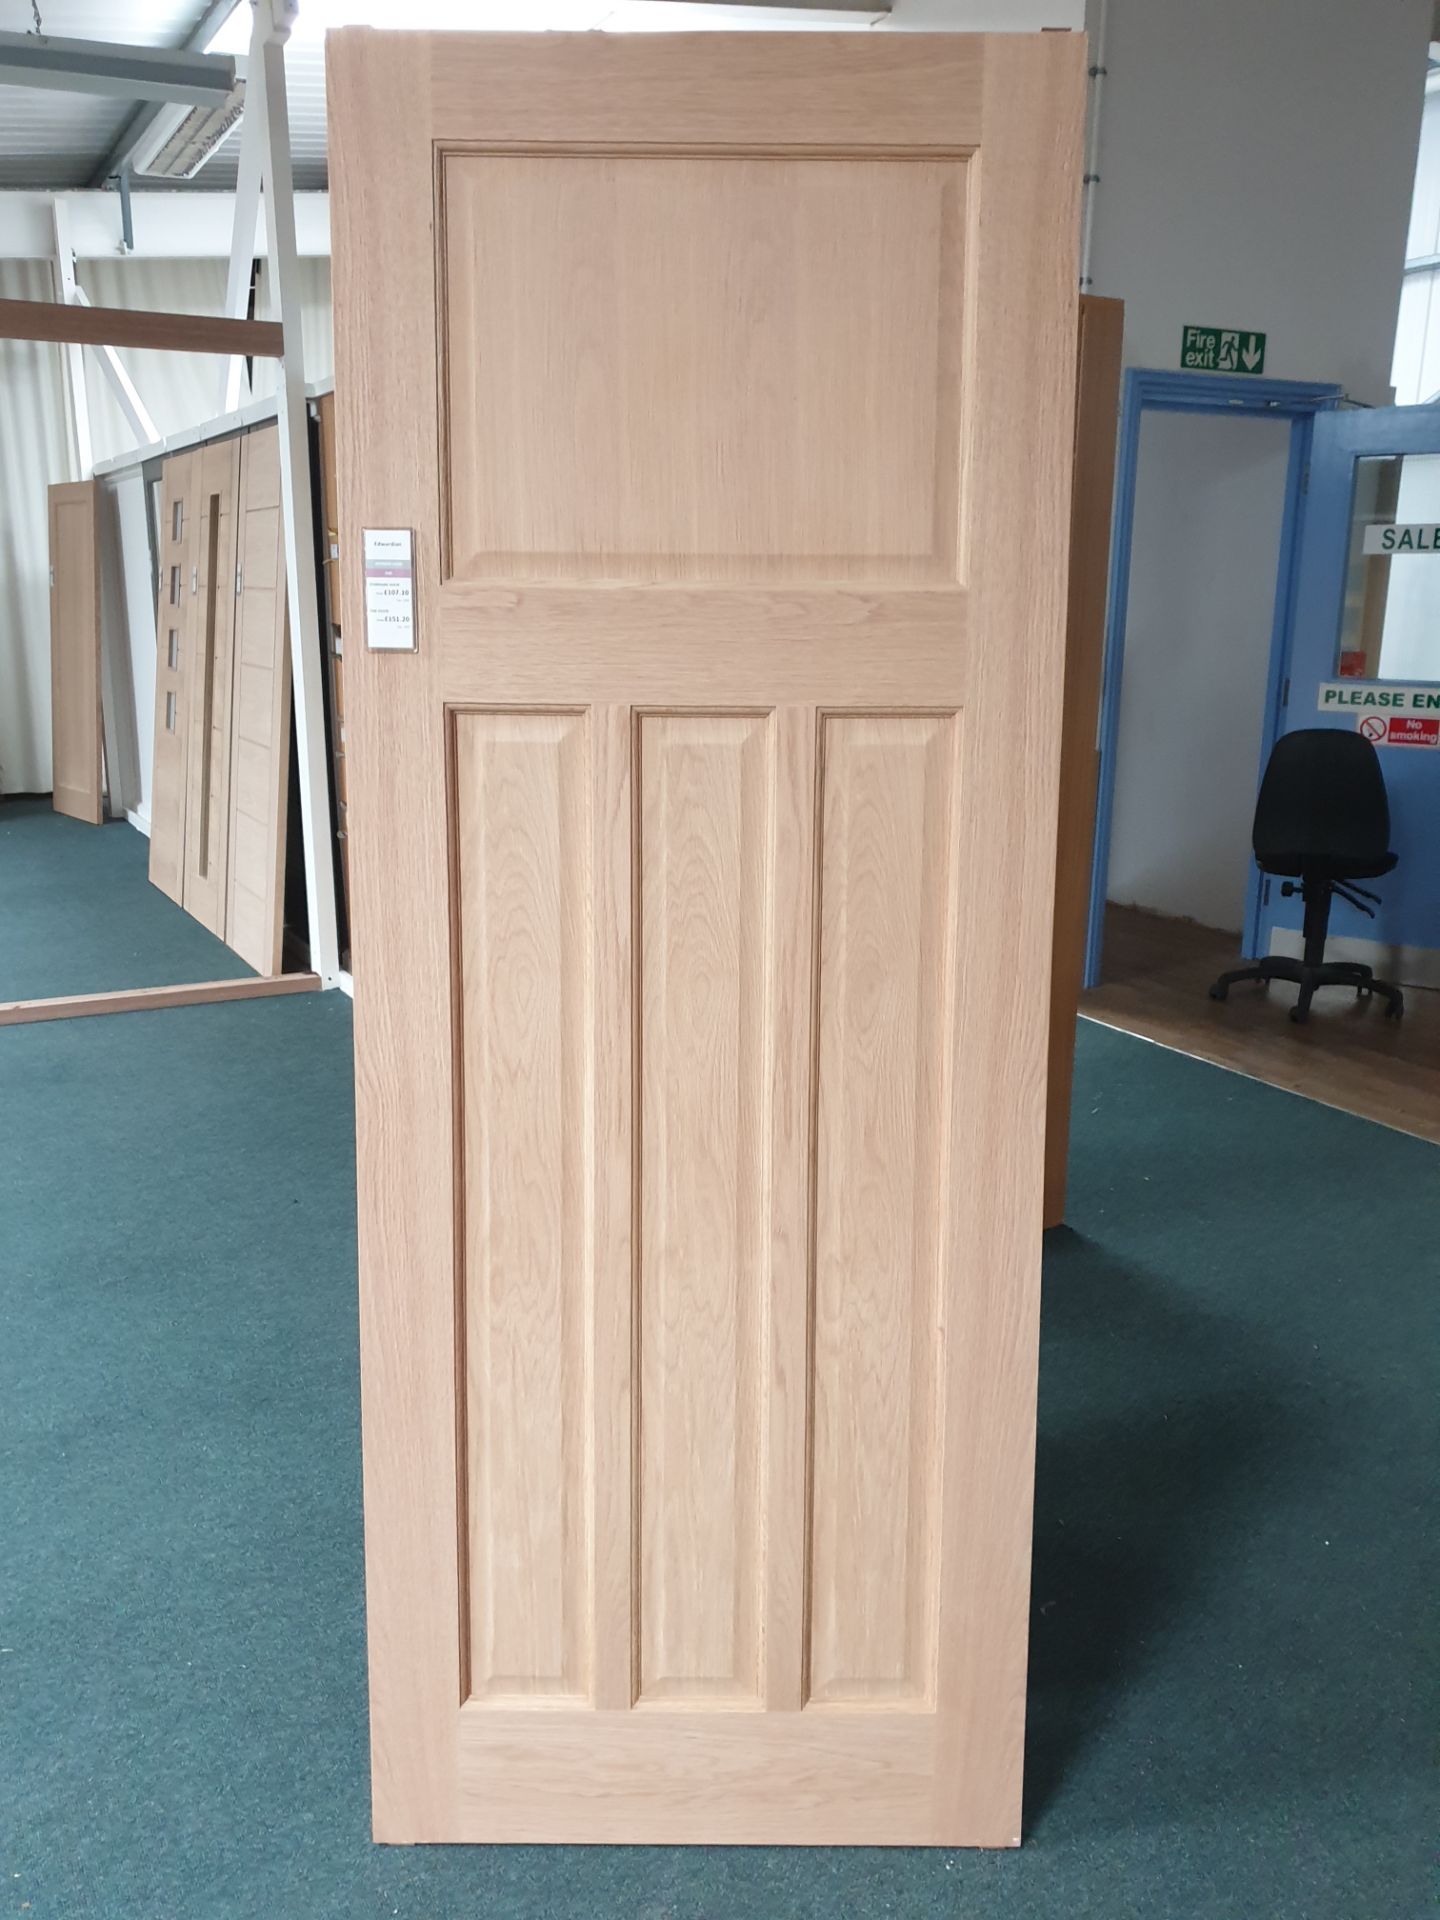 2 x Edwardian 4 Panel Internal Fire Door AW0EDWFD33 78”x33”x44mm - Lots to be handed out in order